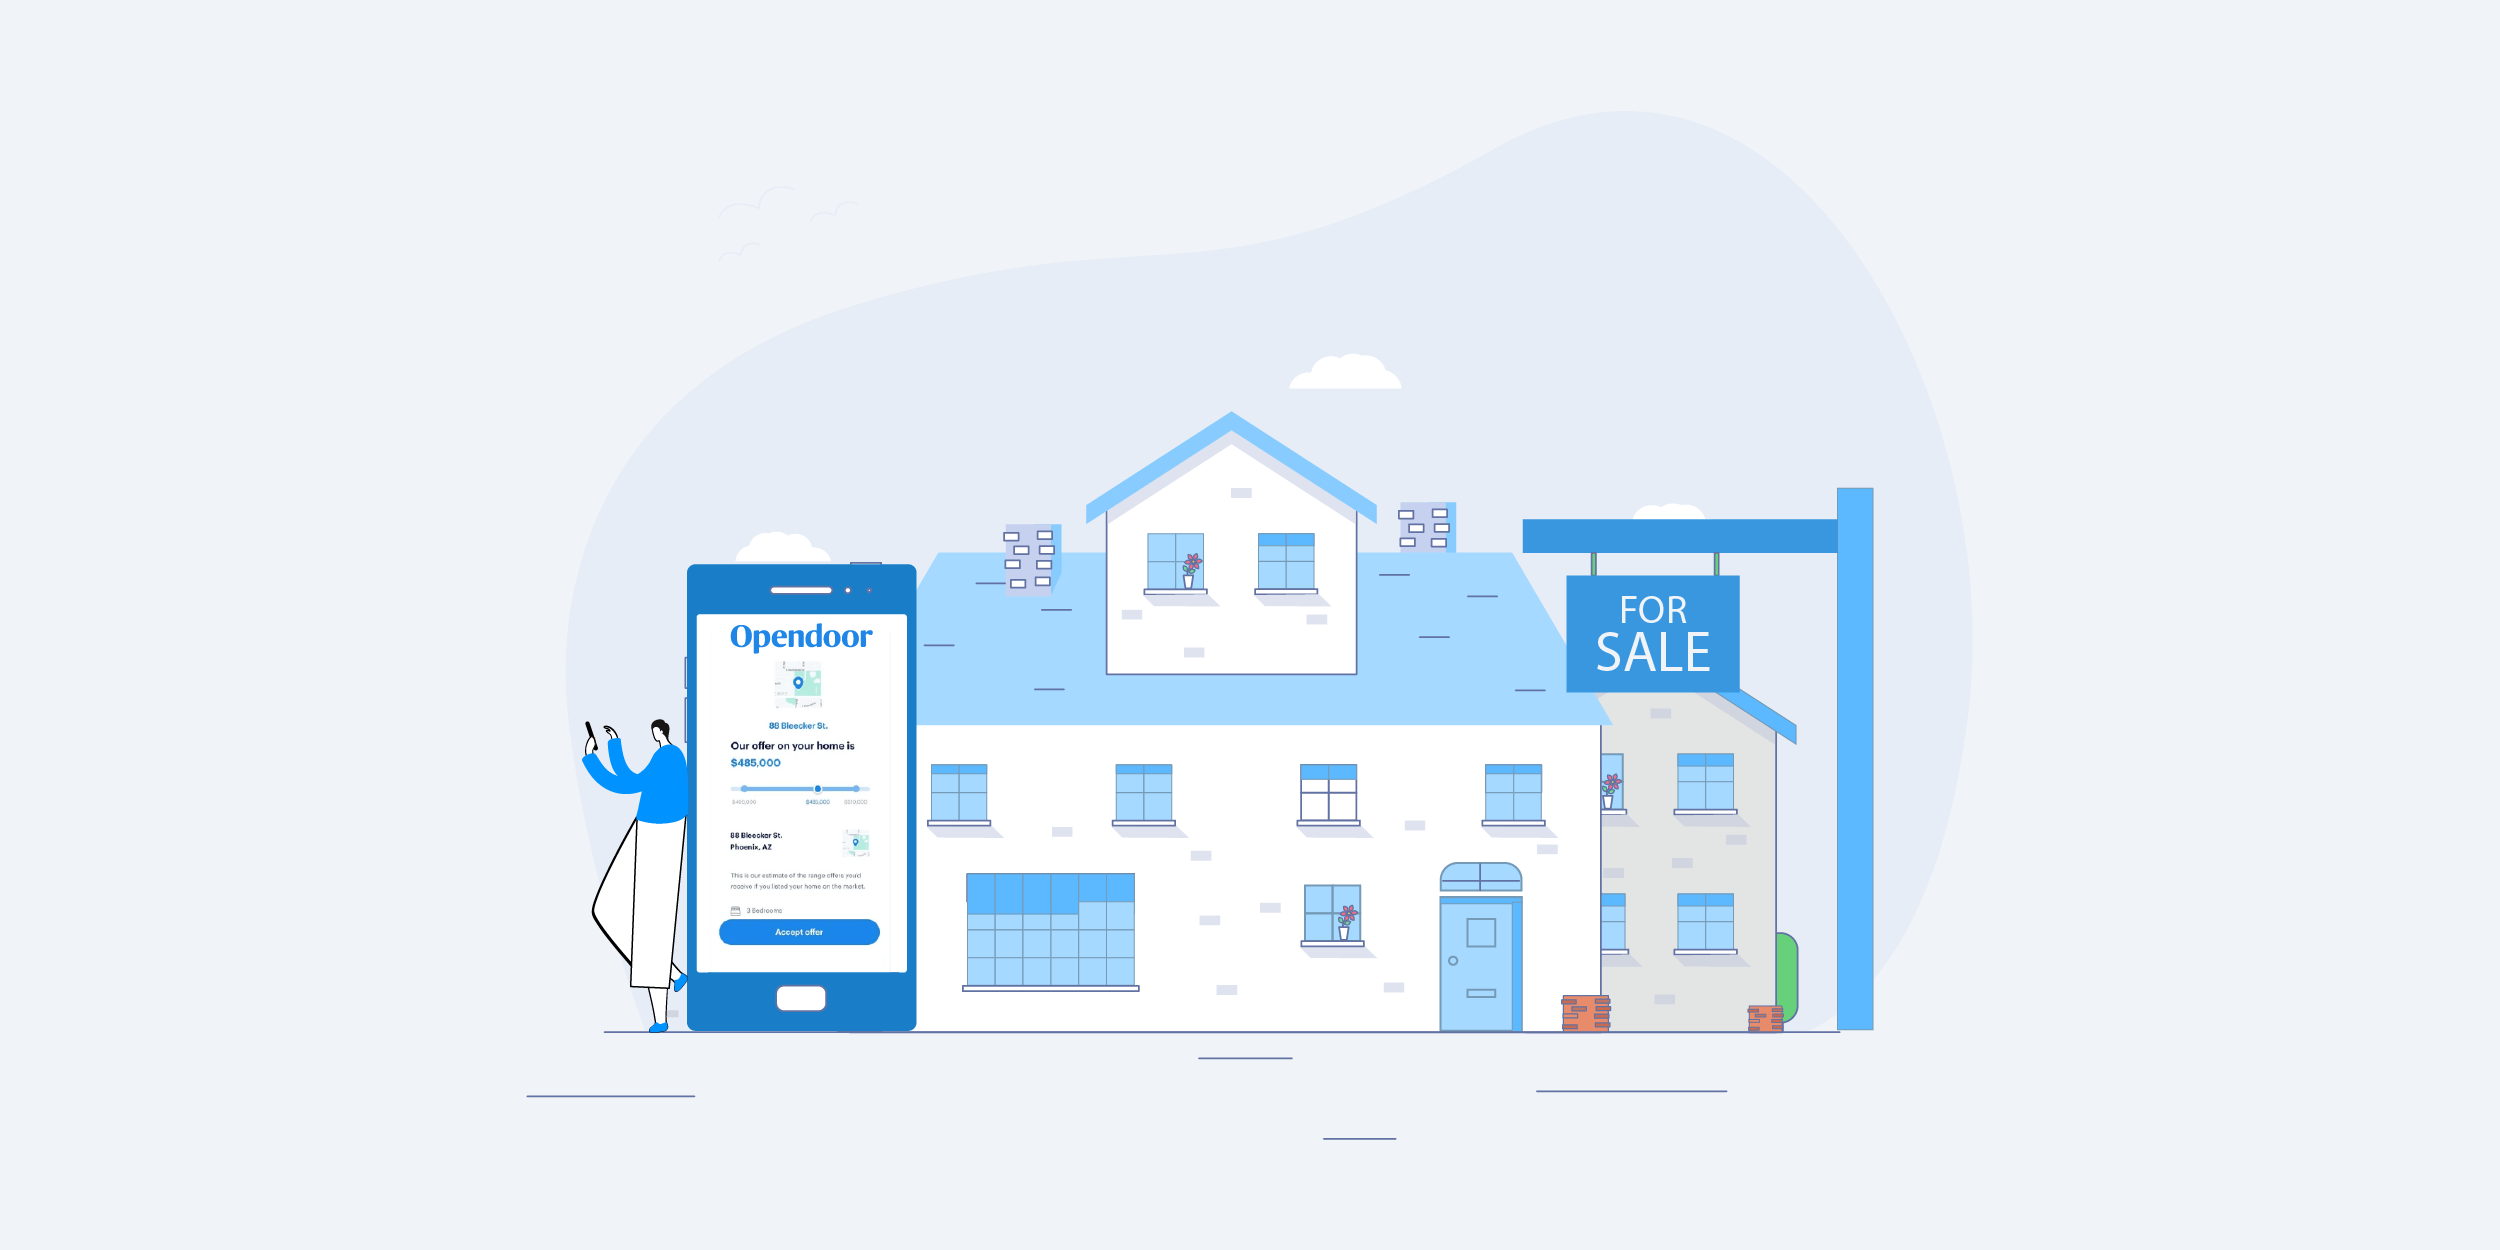 Opendoor App to Make Real-Estate Buying and Selling On-Demand